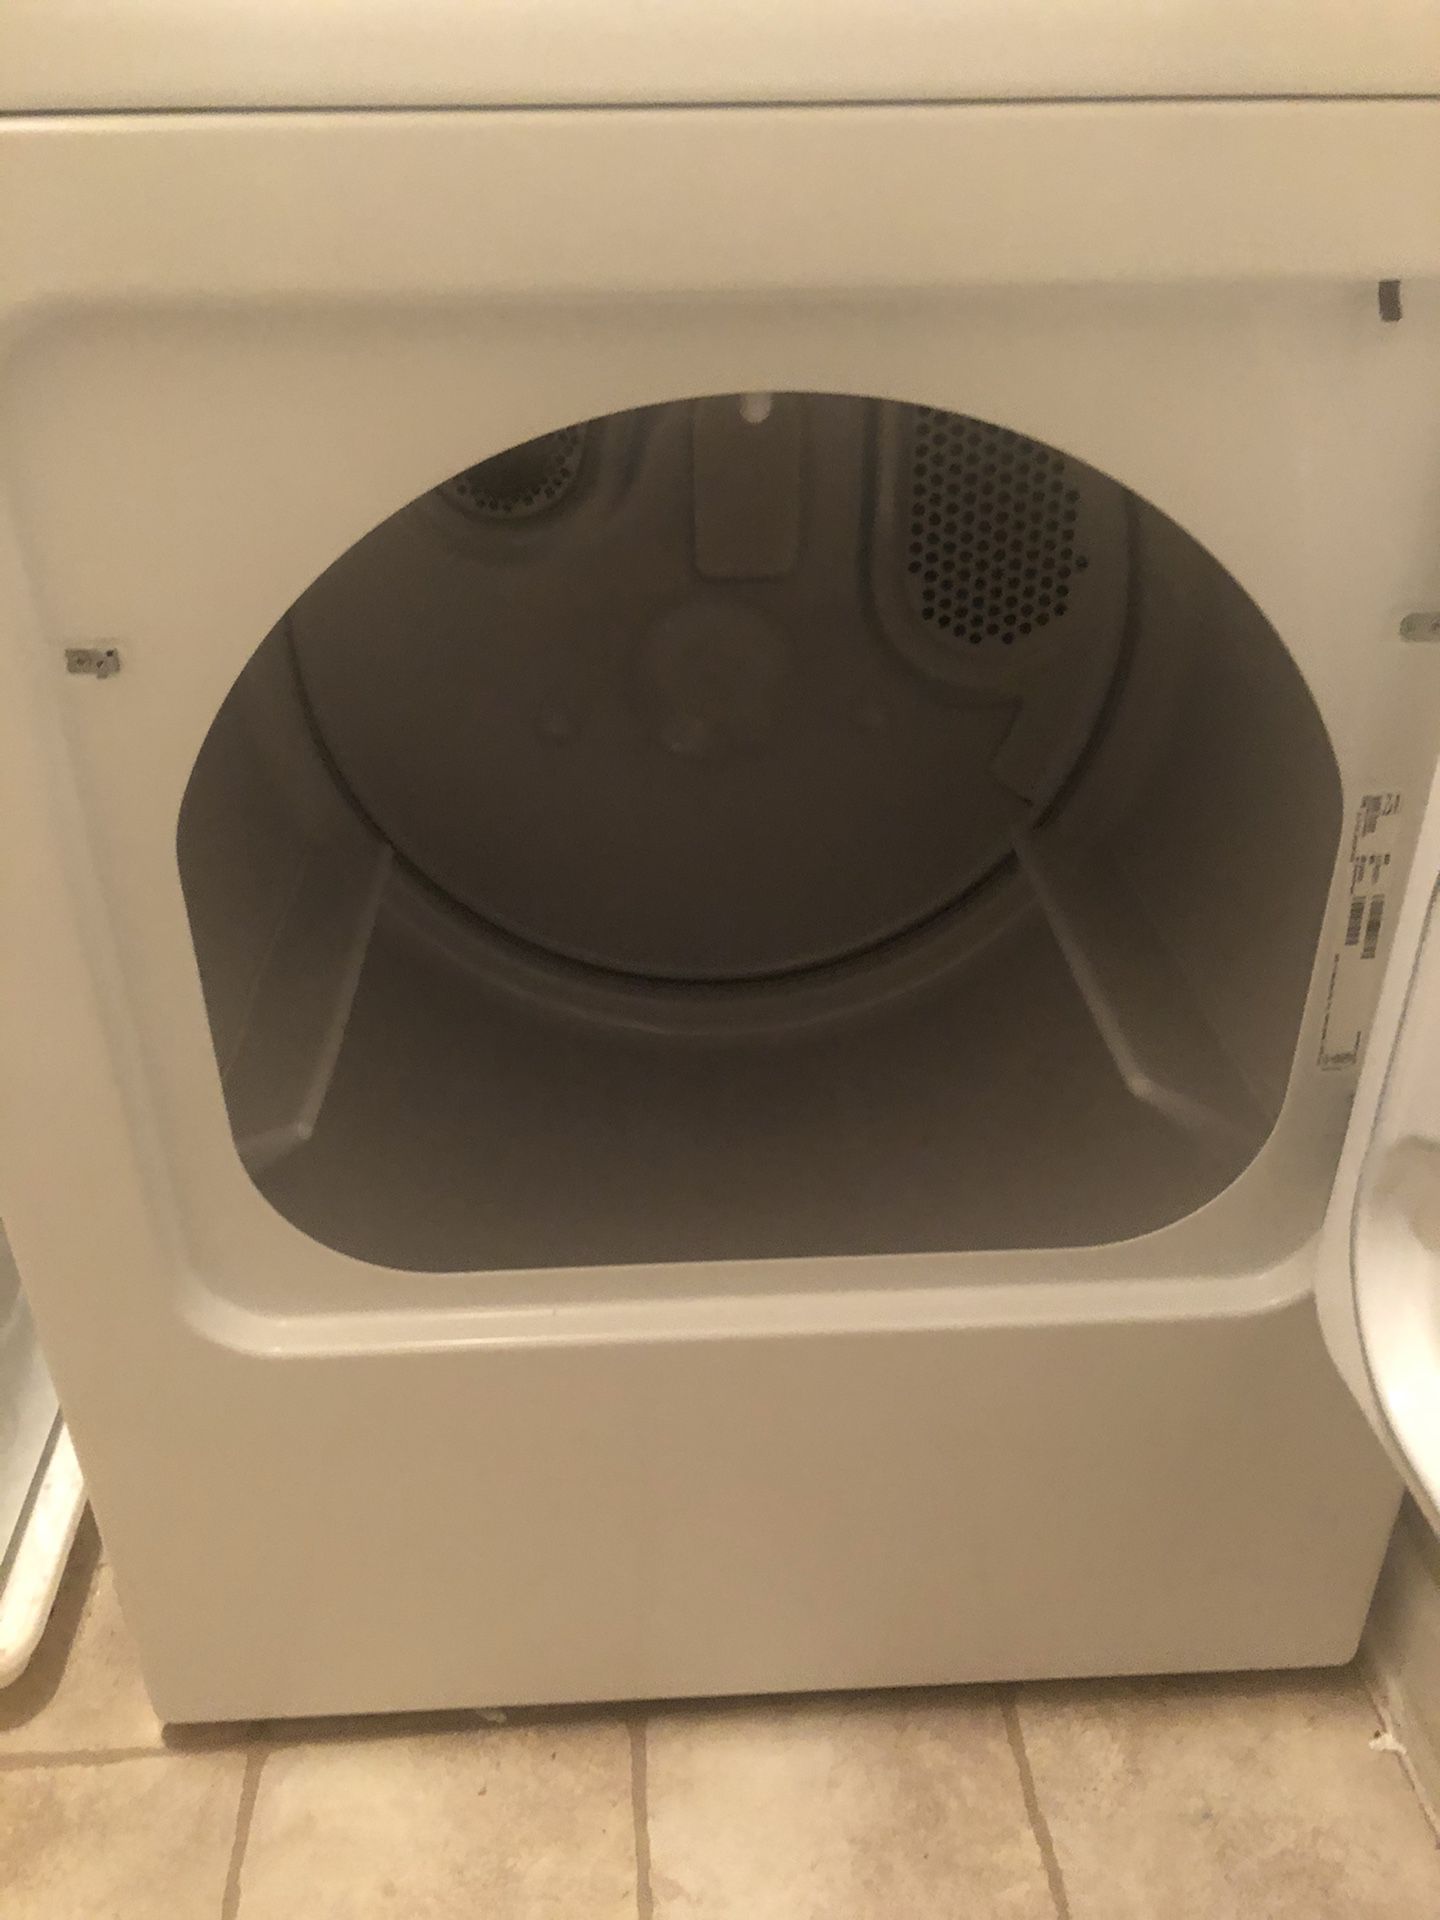 Kenmore series 100 washer and dryer